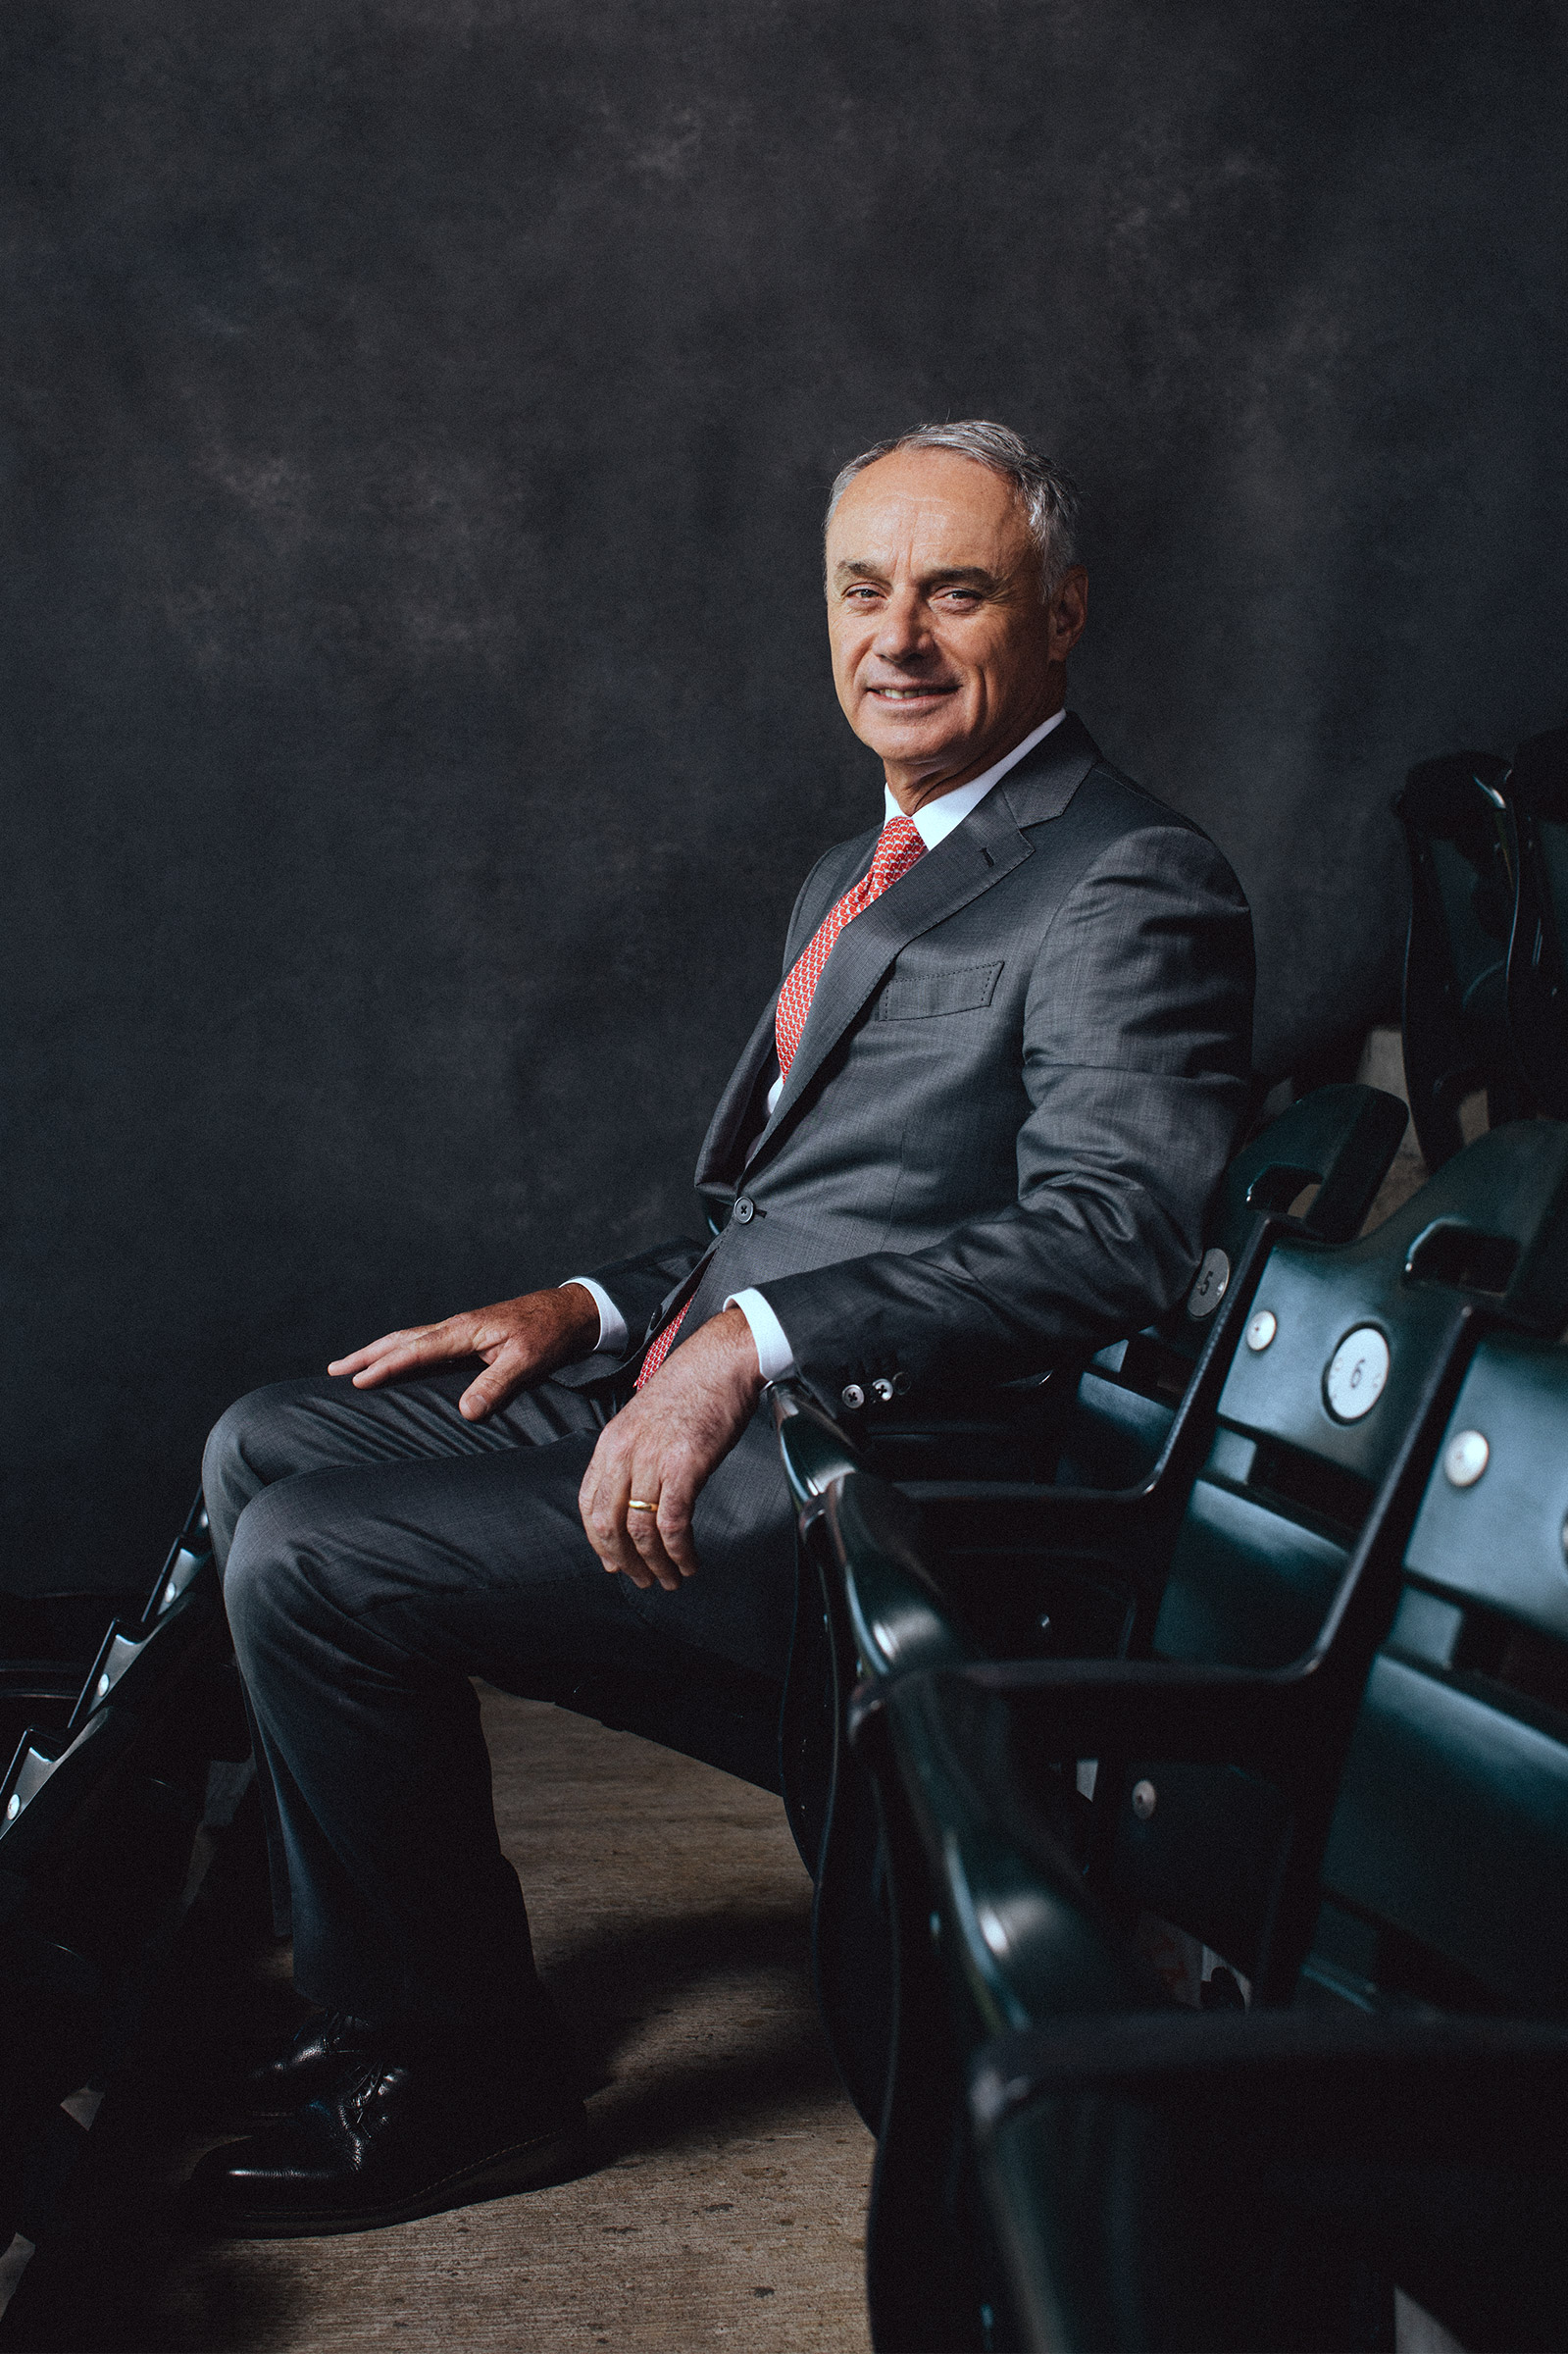 MLB Commissioner Rob Manfred, poses for a portrait at Citi Field on Thursday April 28, 2022 in Queens, New York. (Nick Laham)